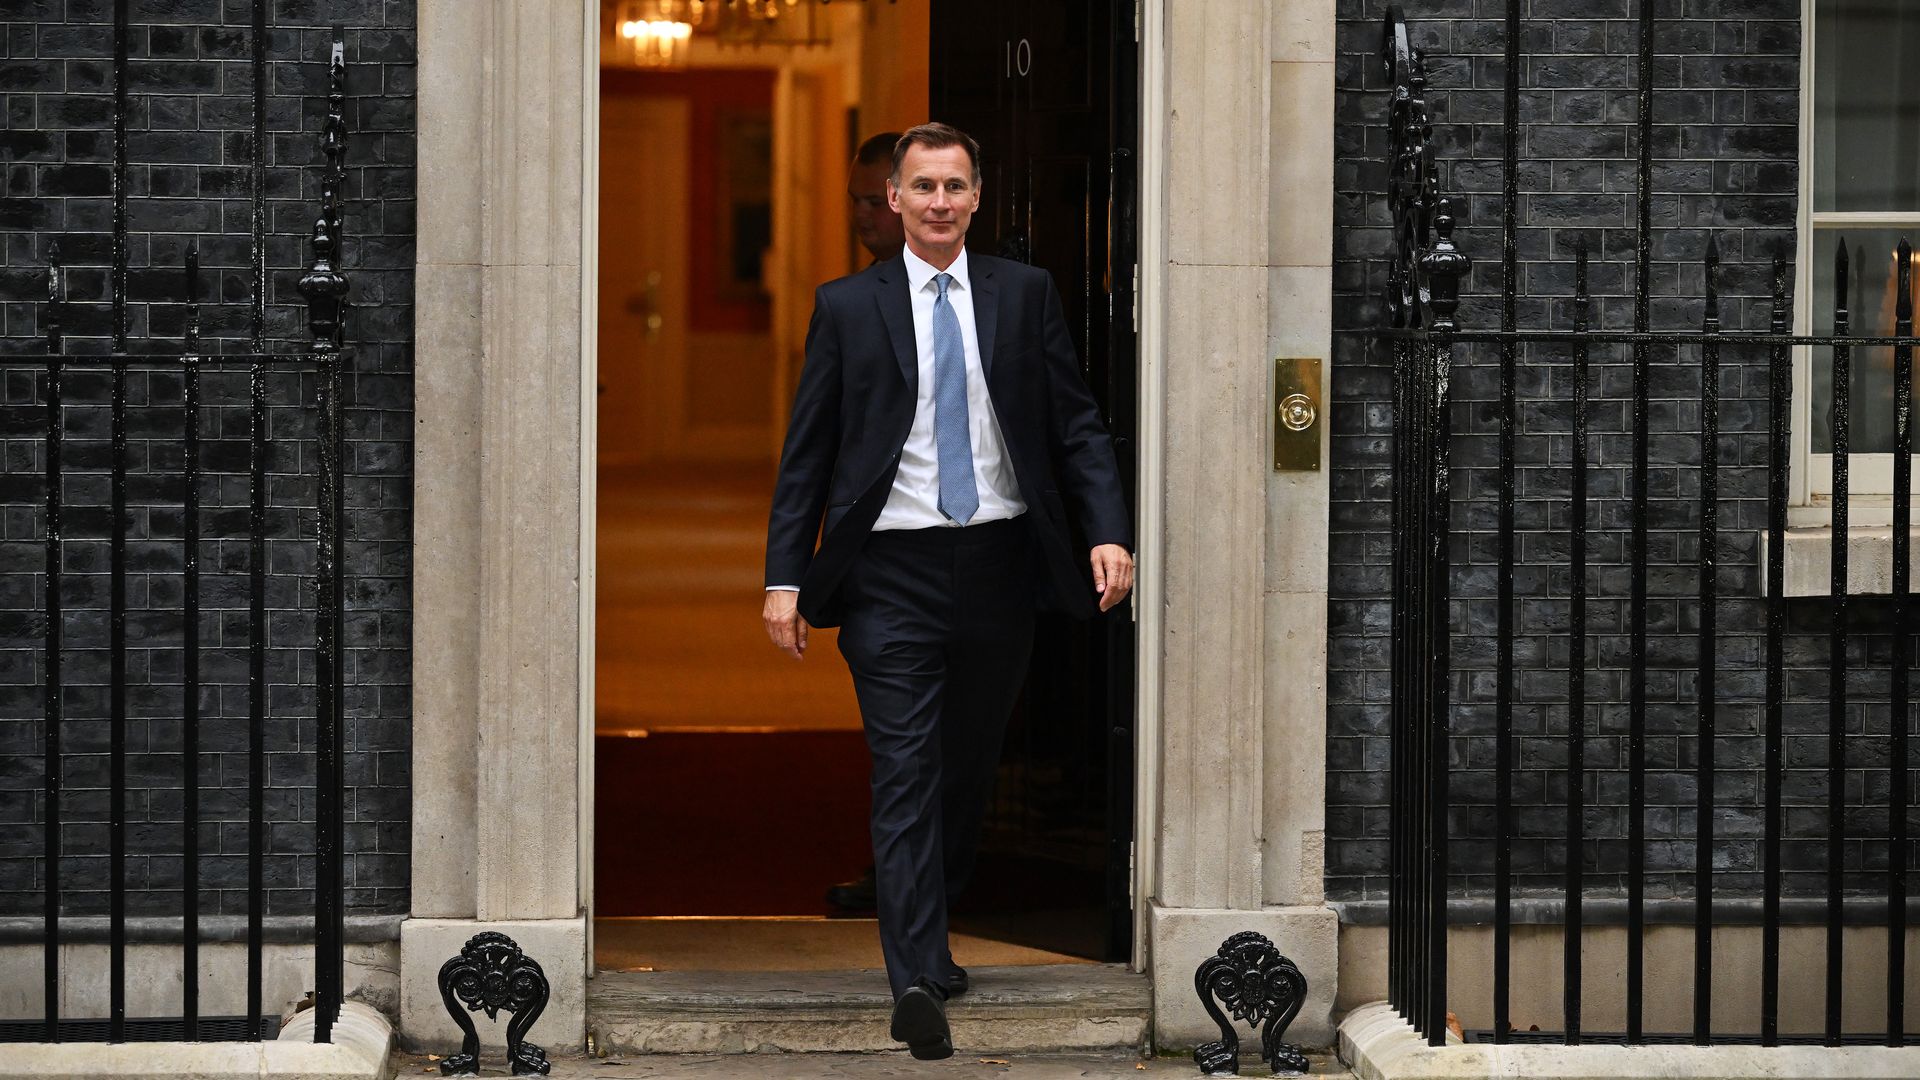 Chancellor of the Exchequer Jeremy Hunt leaves 10 Downing Street on Monday.